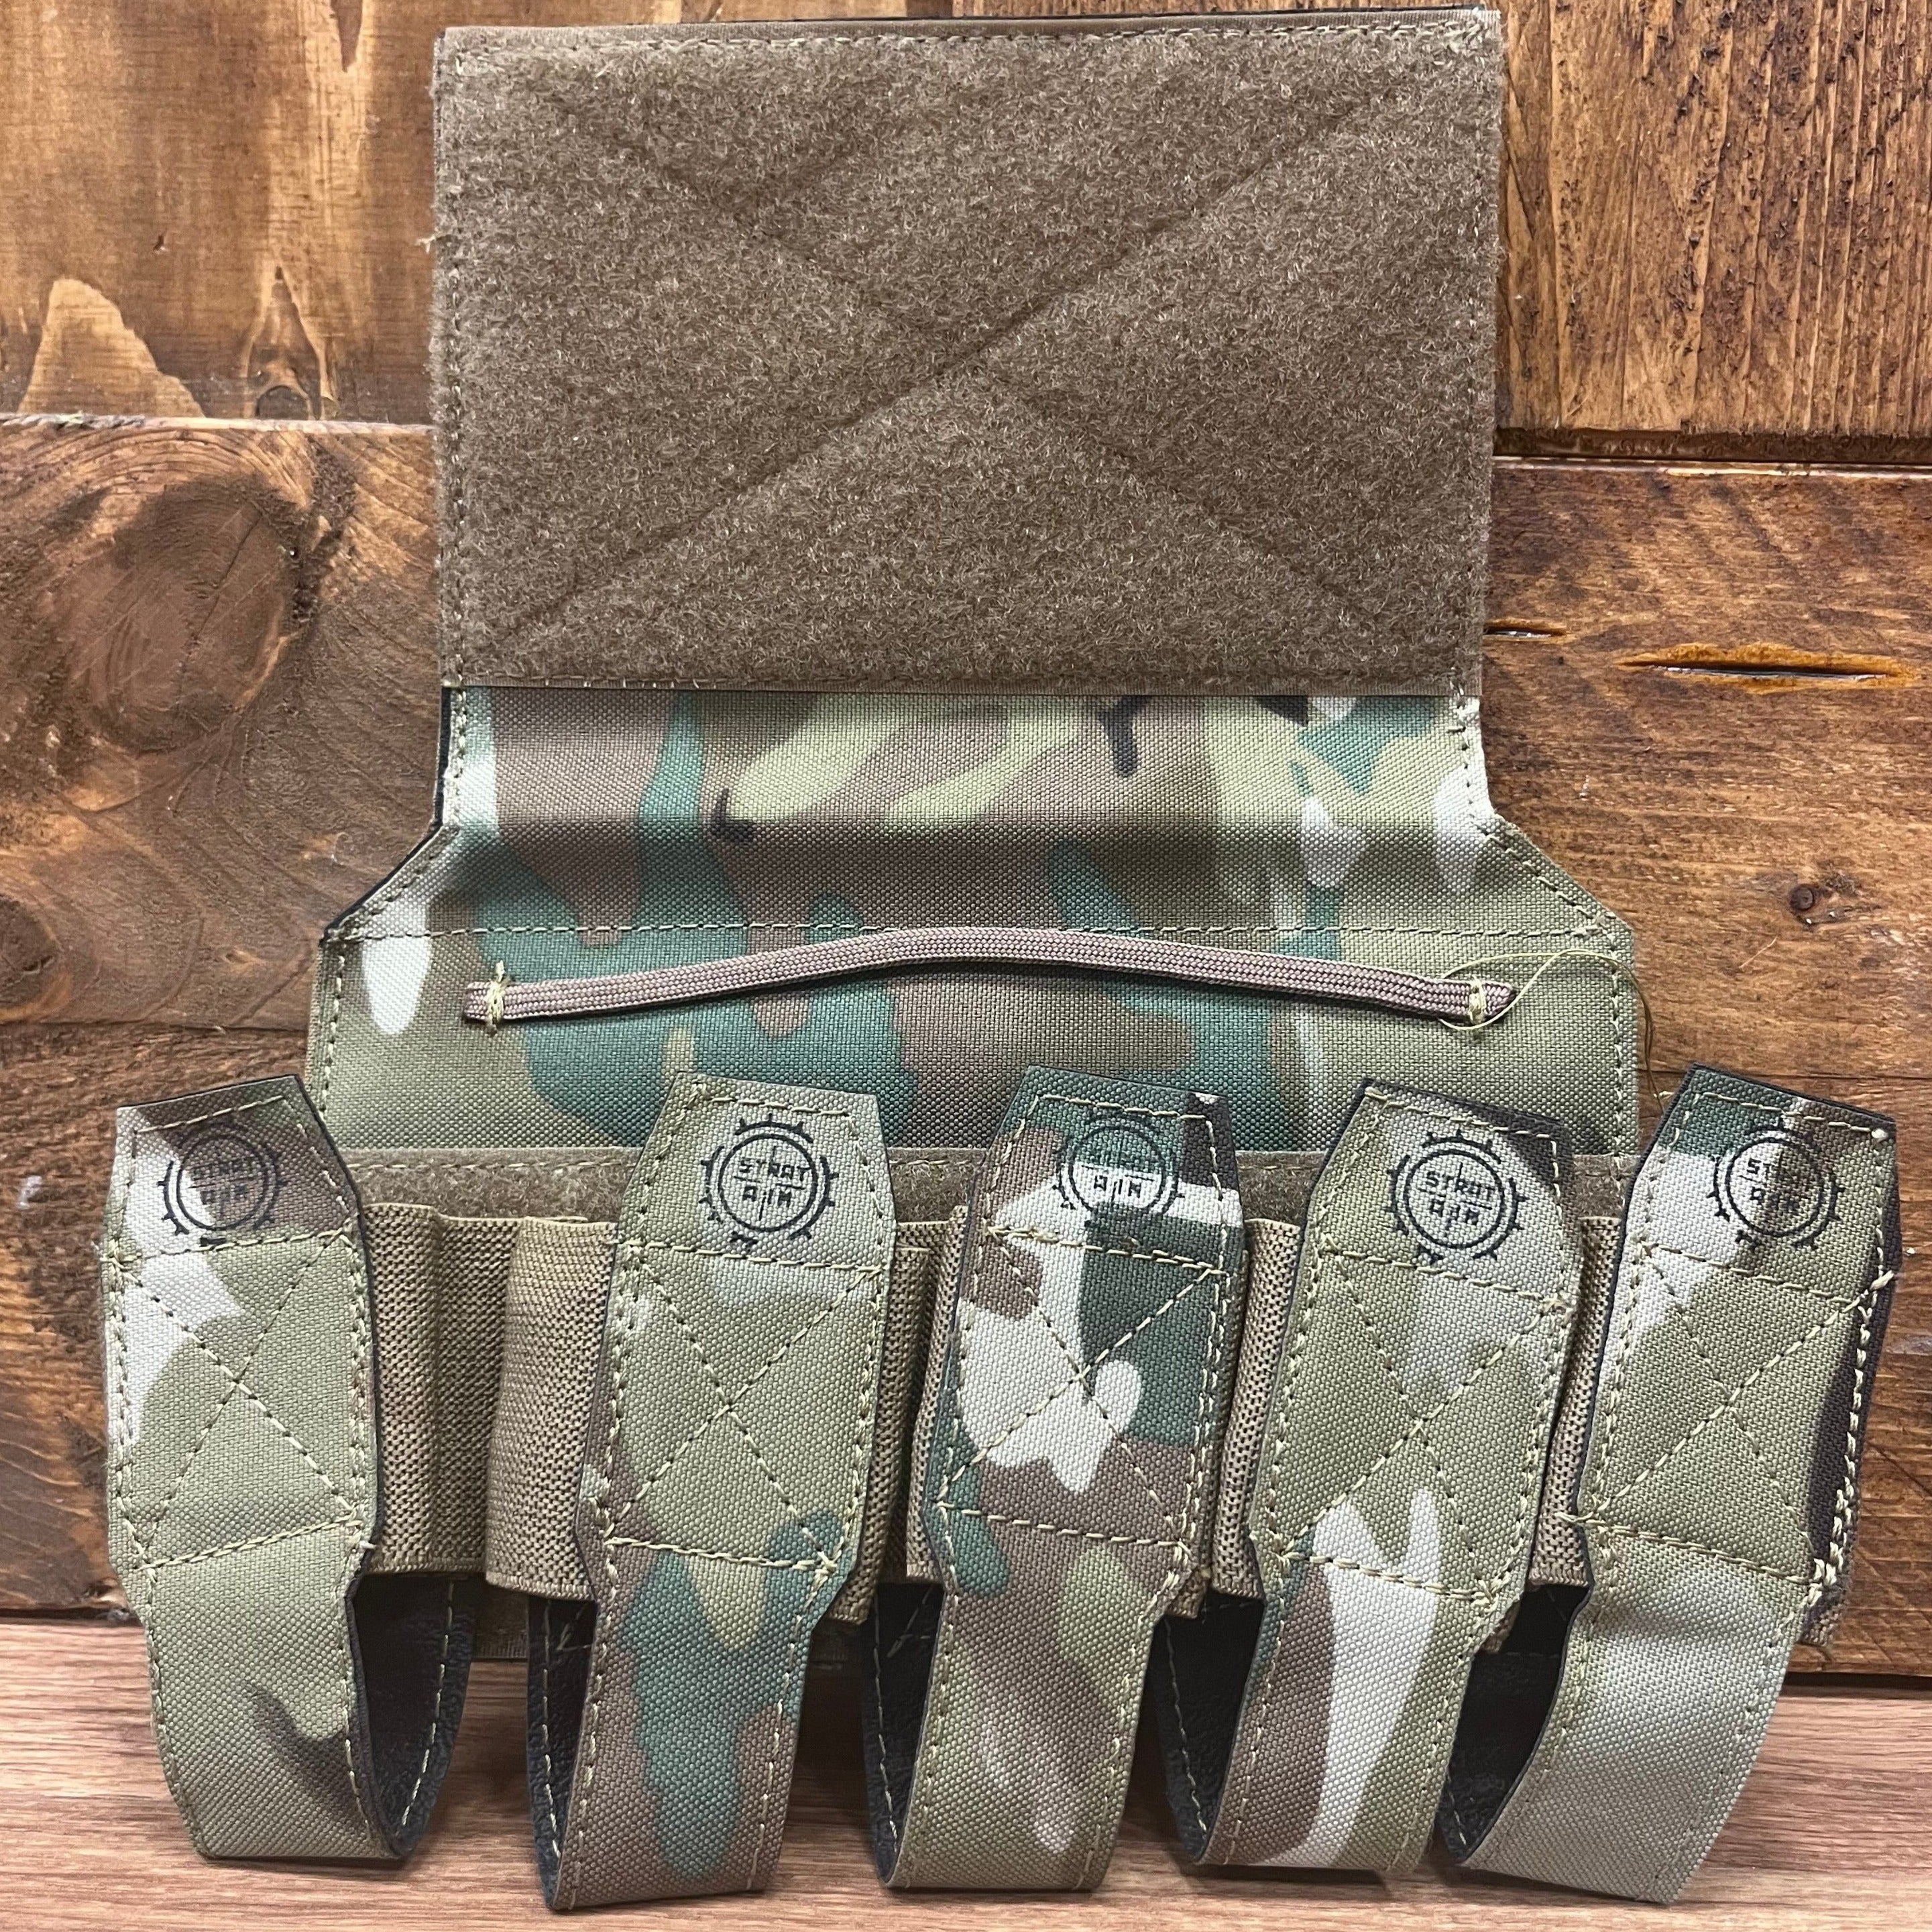 5 Banger Dangler Grenade Pouch attached to tactical vest showcasing capacity